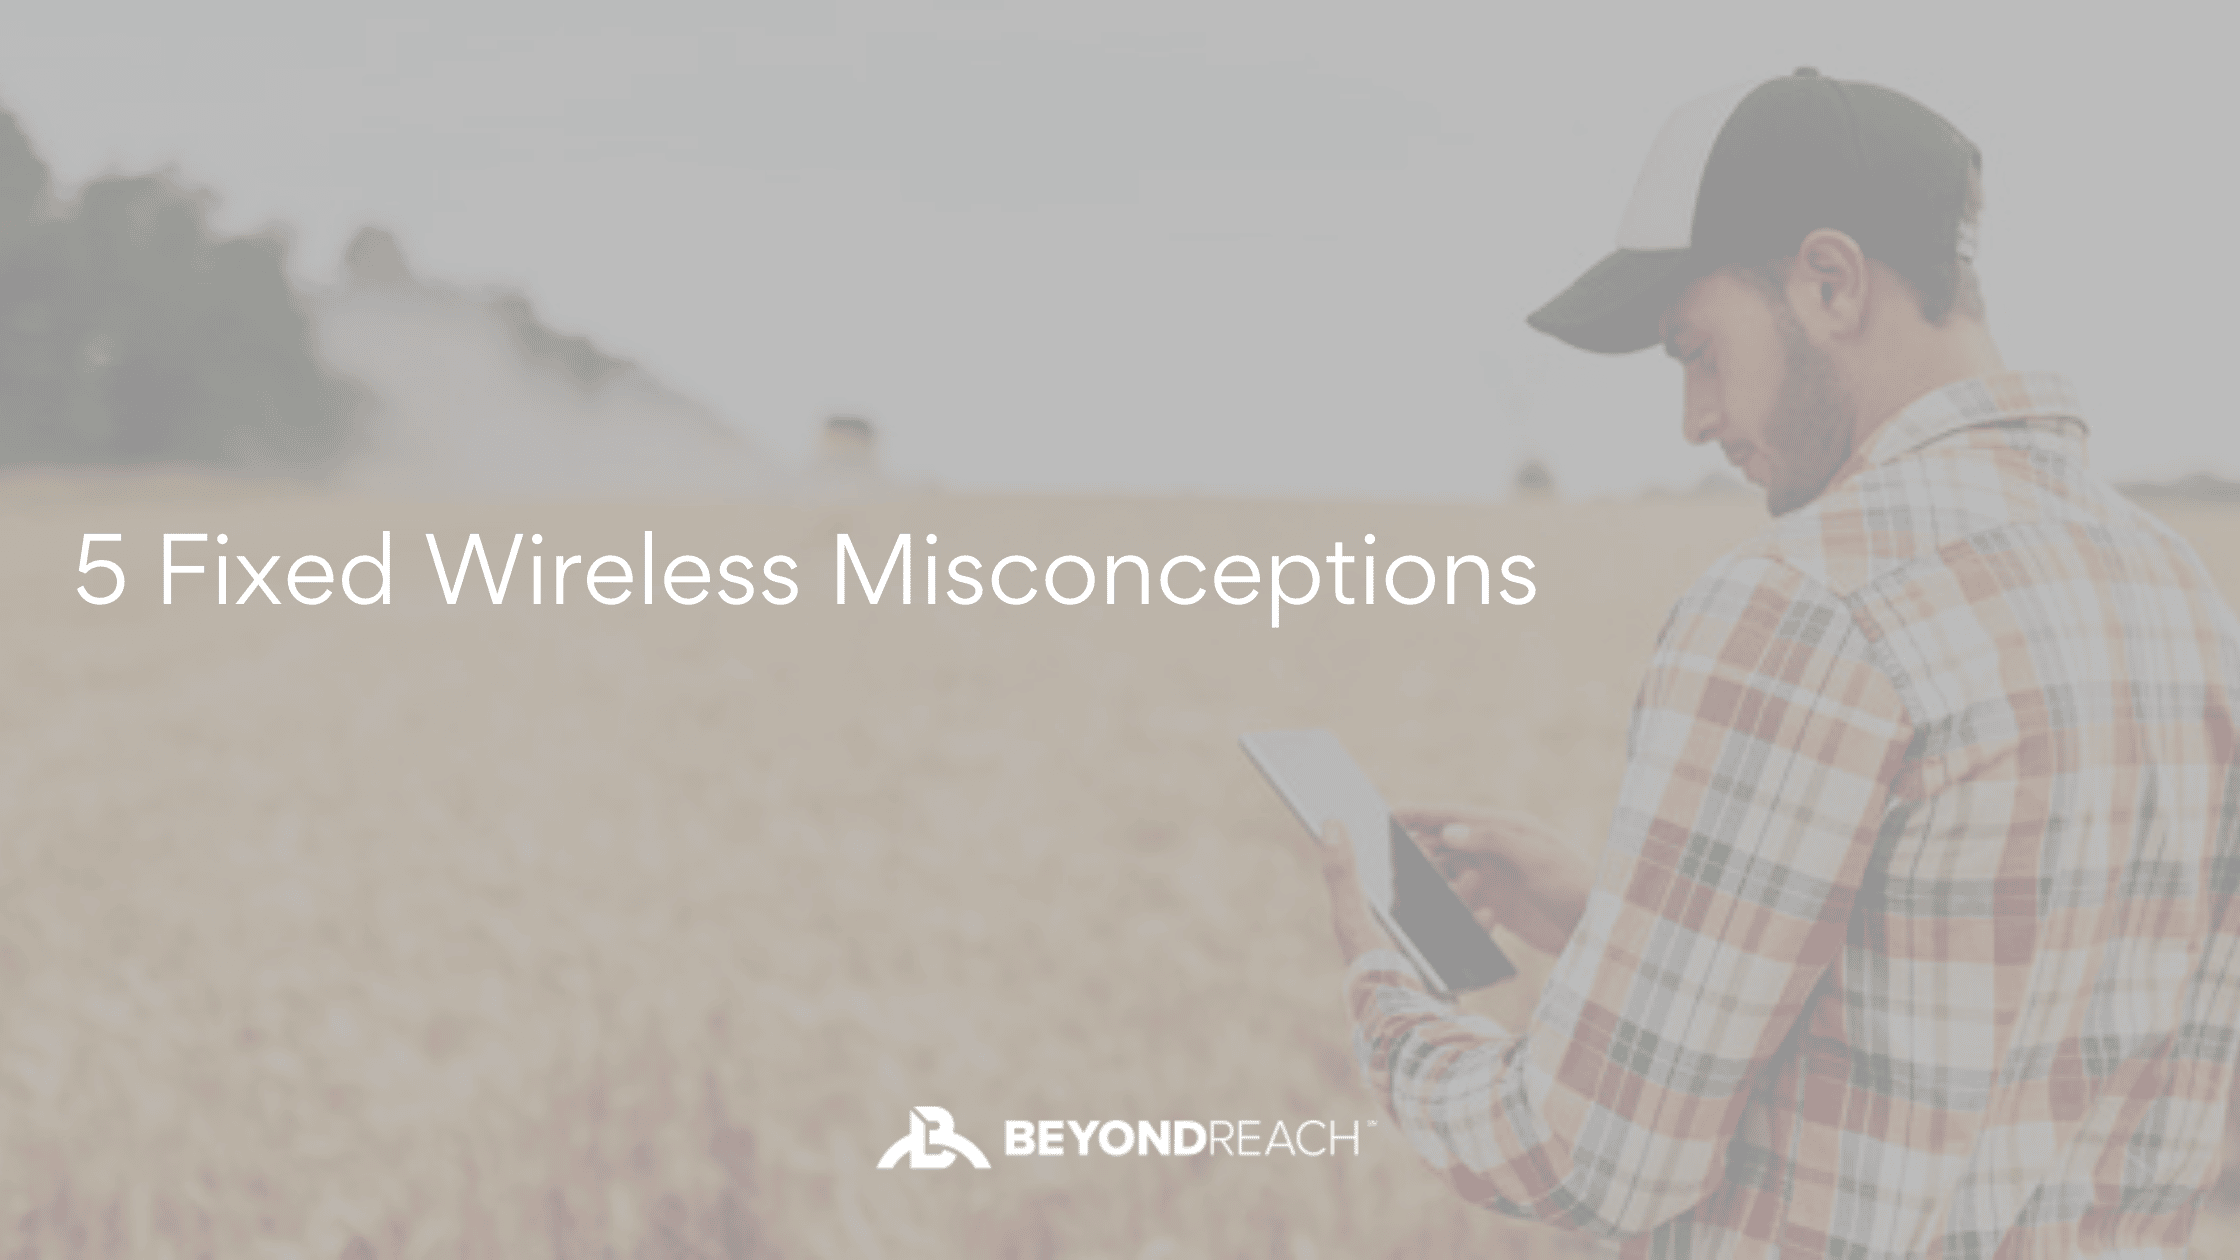 5 Fixed Wireless Misconceptions